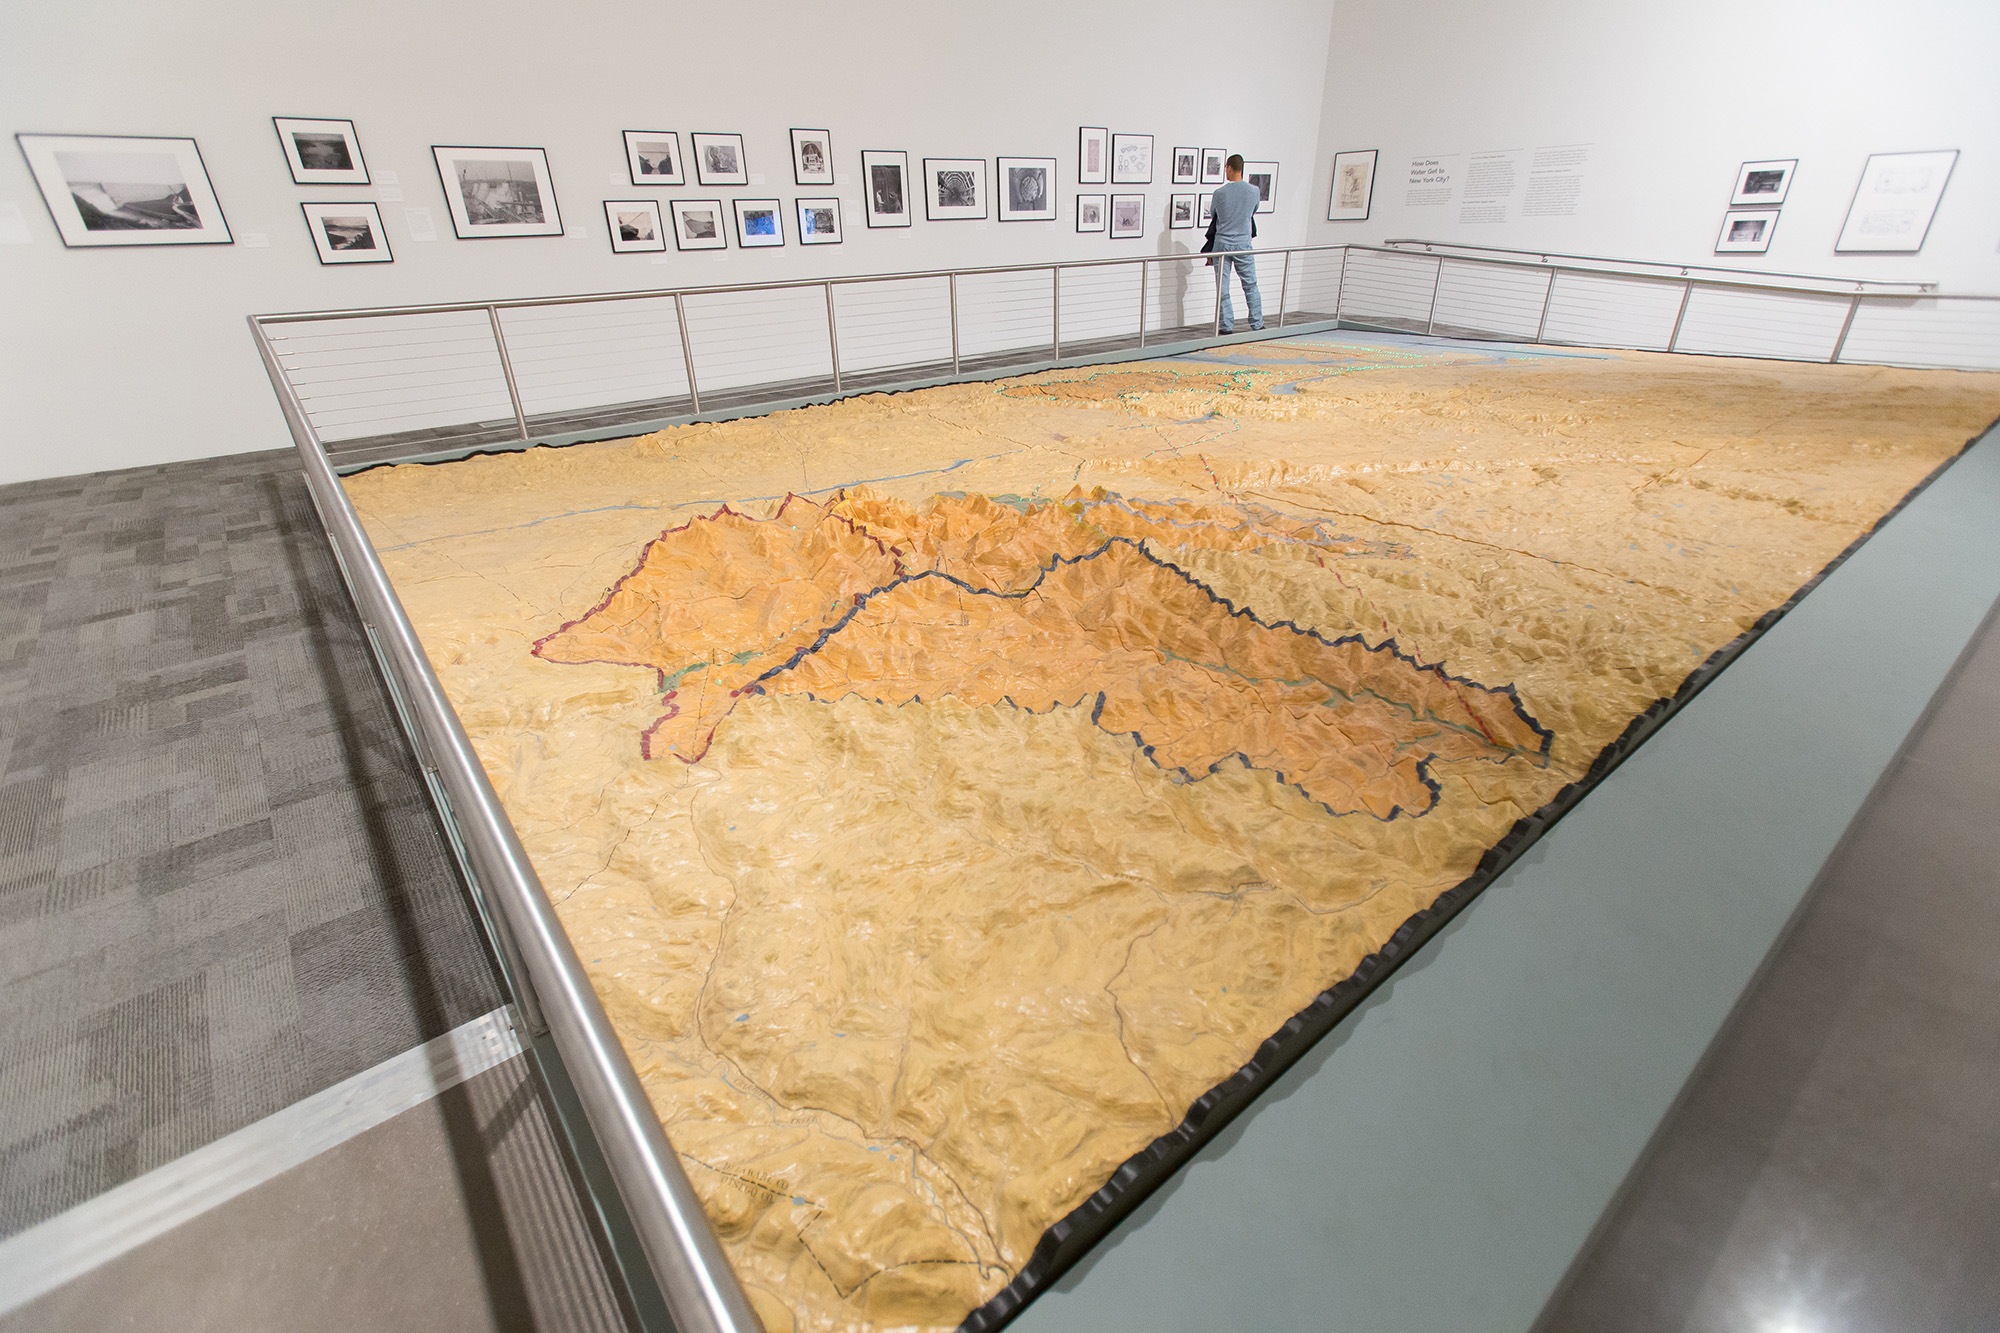 A 3D relief map of New York’s water system that was too large for the 1964 World's Fair. Now on permanent view the hilly terrain, the divets and rivers that the Catskills, Croton, and Delaware watersheds flow into are on display. Lights follow the path of aqueducts that lead to New York City.